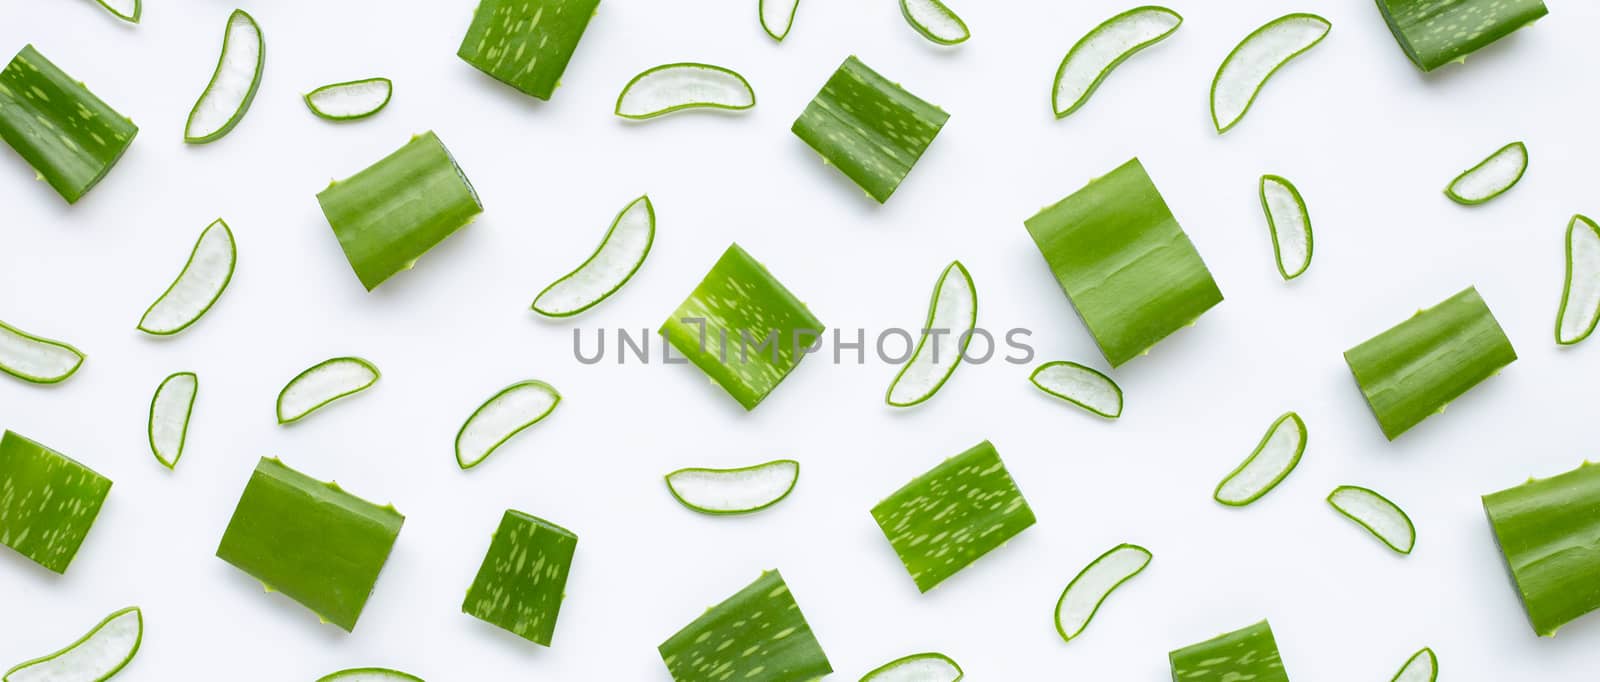 Aloe Vera leaves cut pieces with slices on white background.